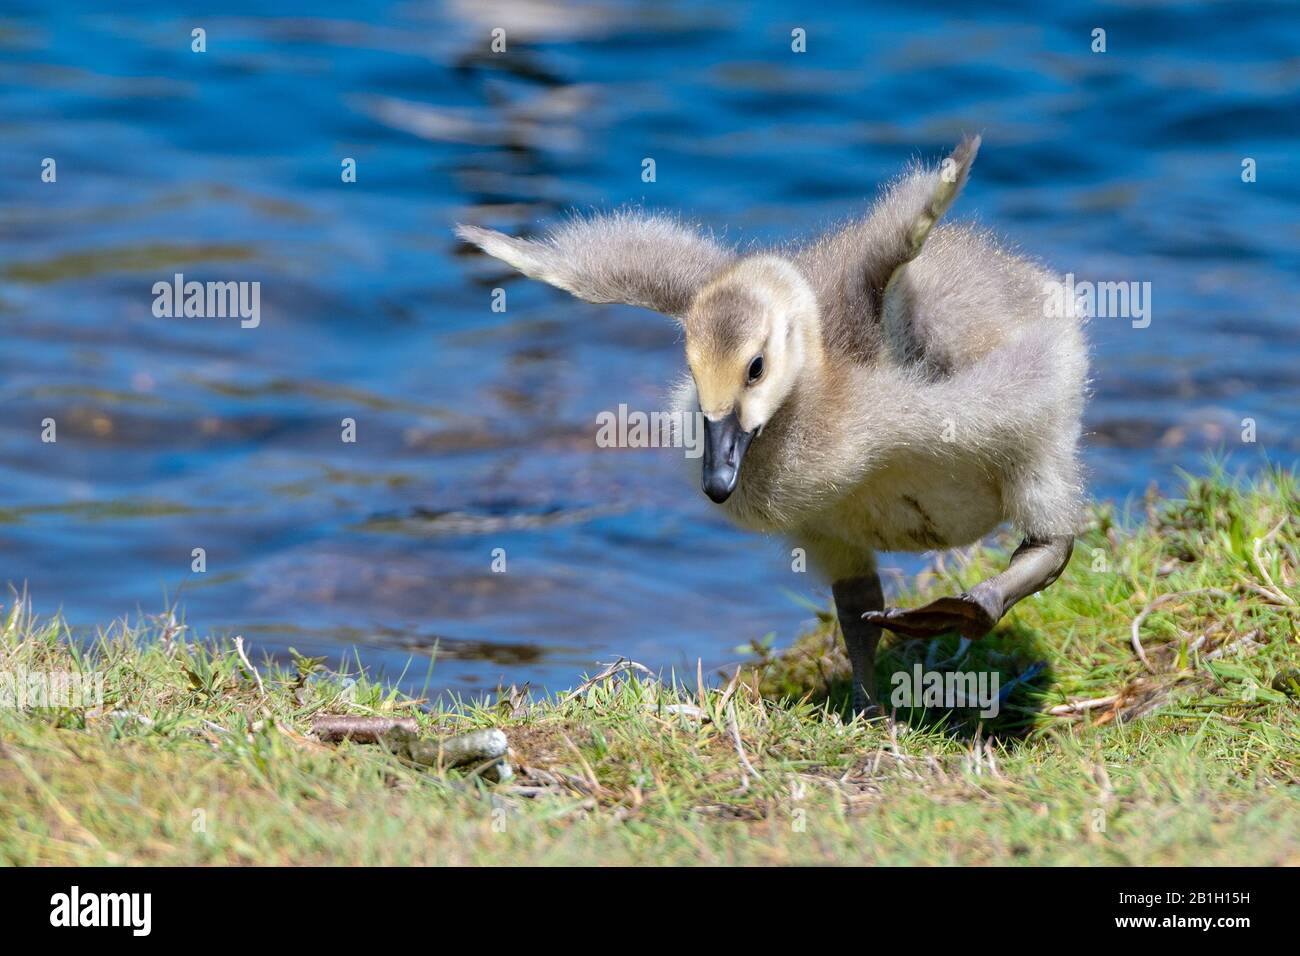 A closeup of a young baby Canada Goose trying unsuccessfully to fly. He is on grass, and blue water is in the background. Stock Photo